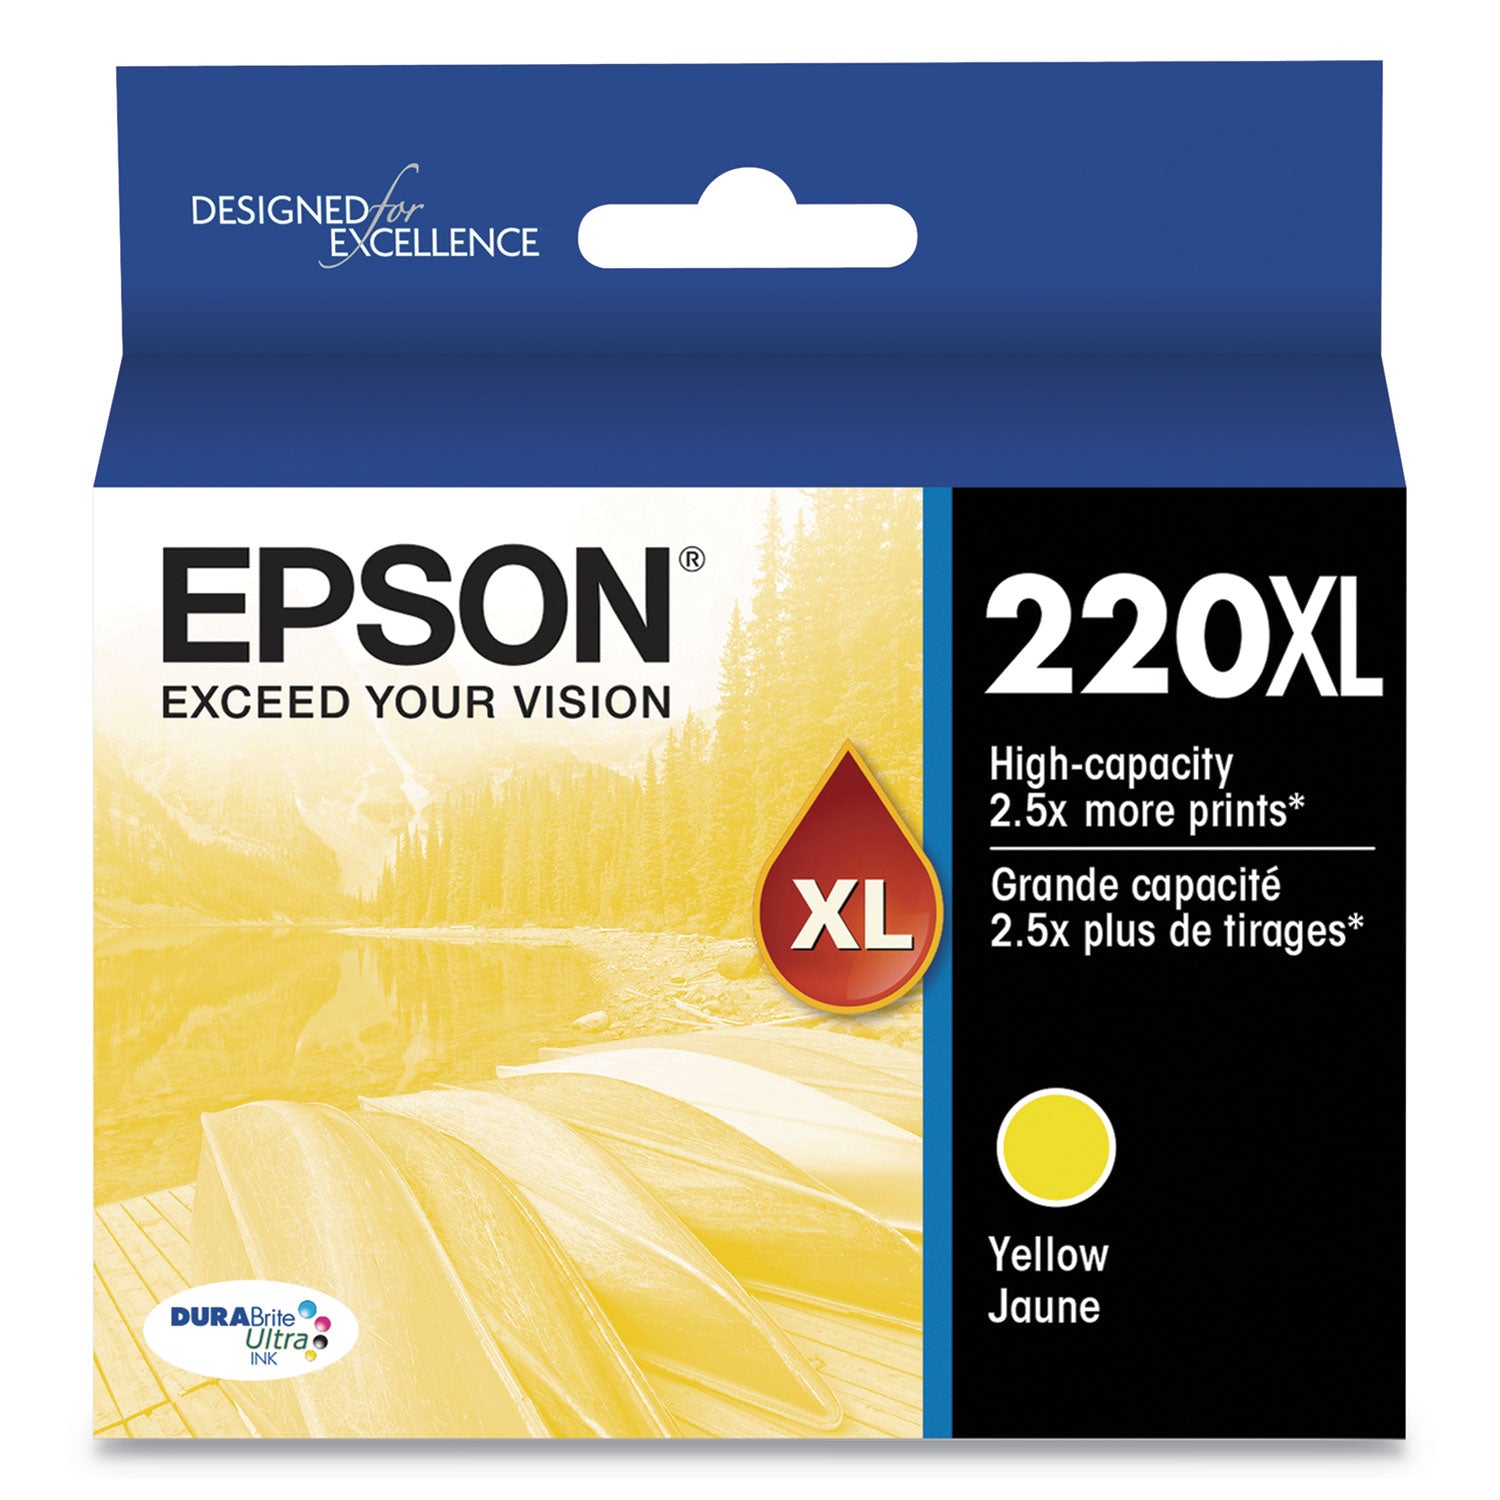 t220xl420-s-220xl-durabrite-ultra-high-yield-ink-450-page-yield-yellow_epst220xl420s - 1